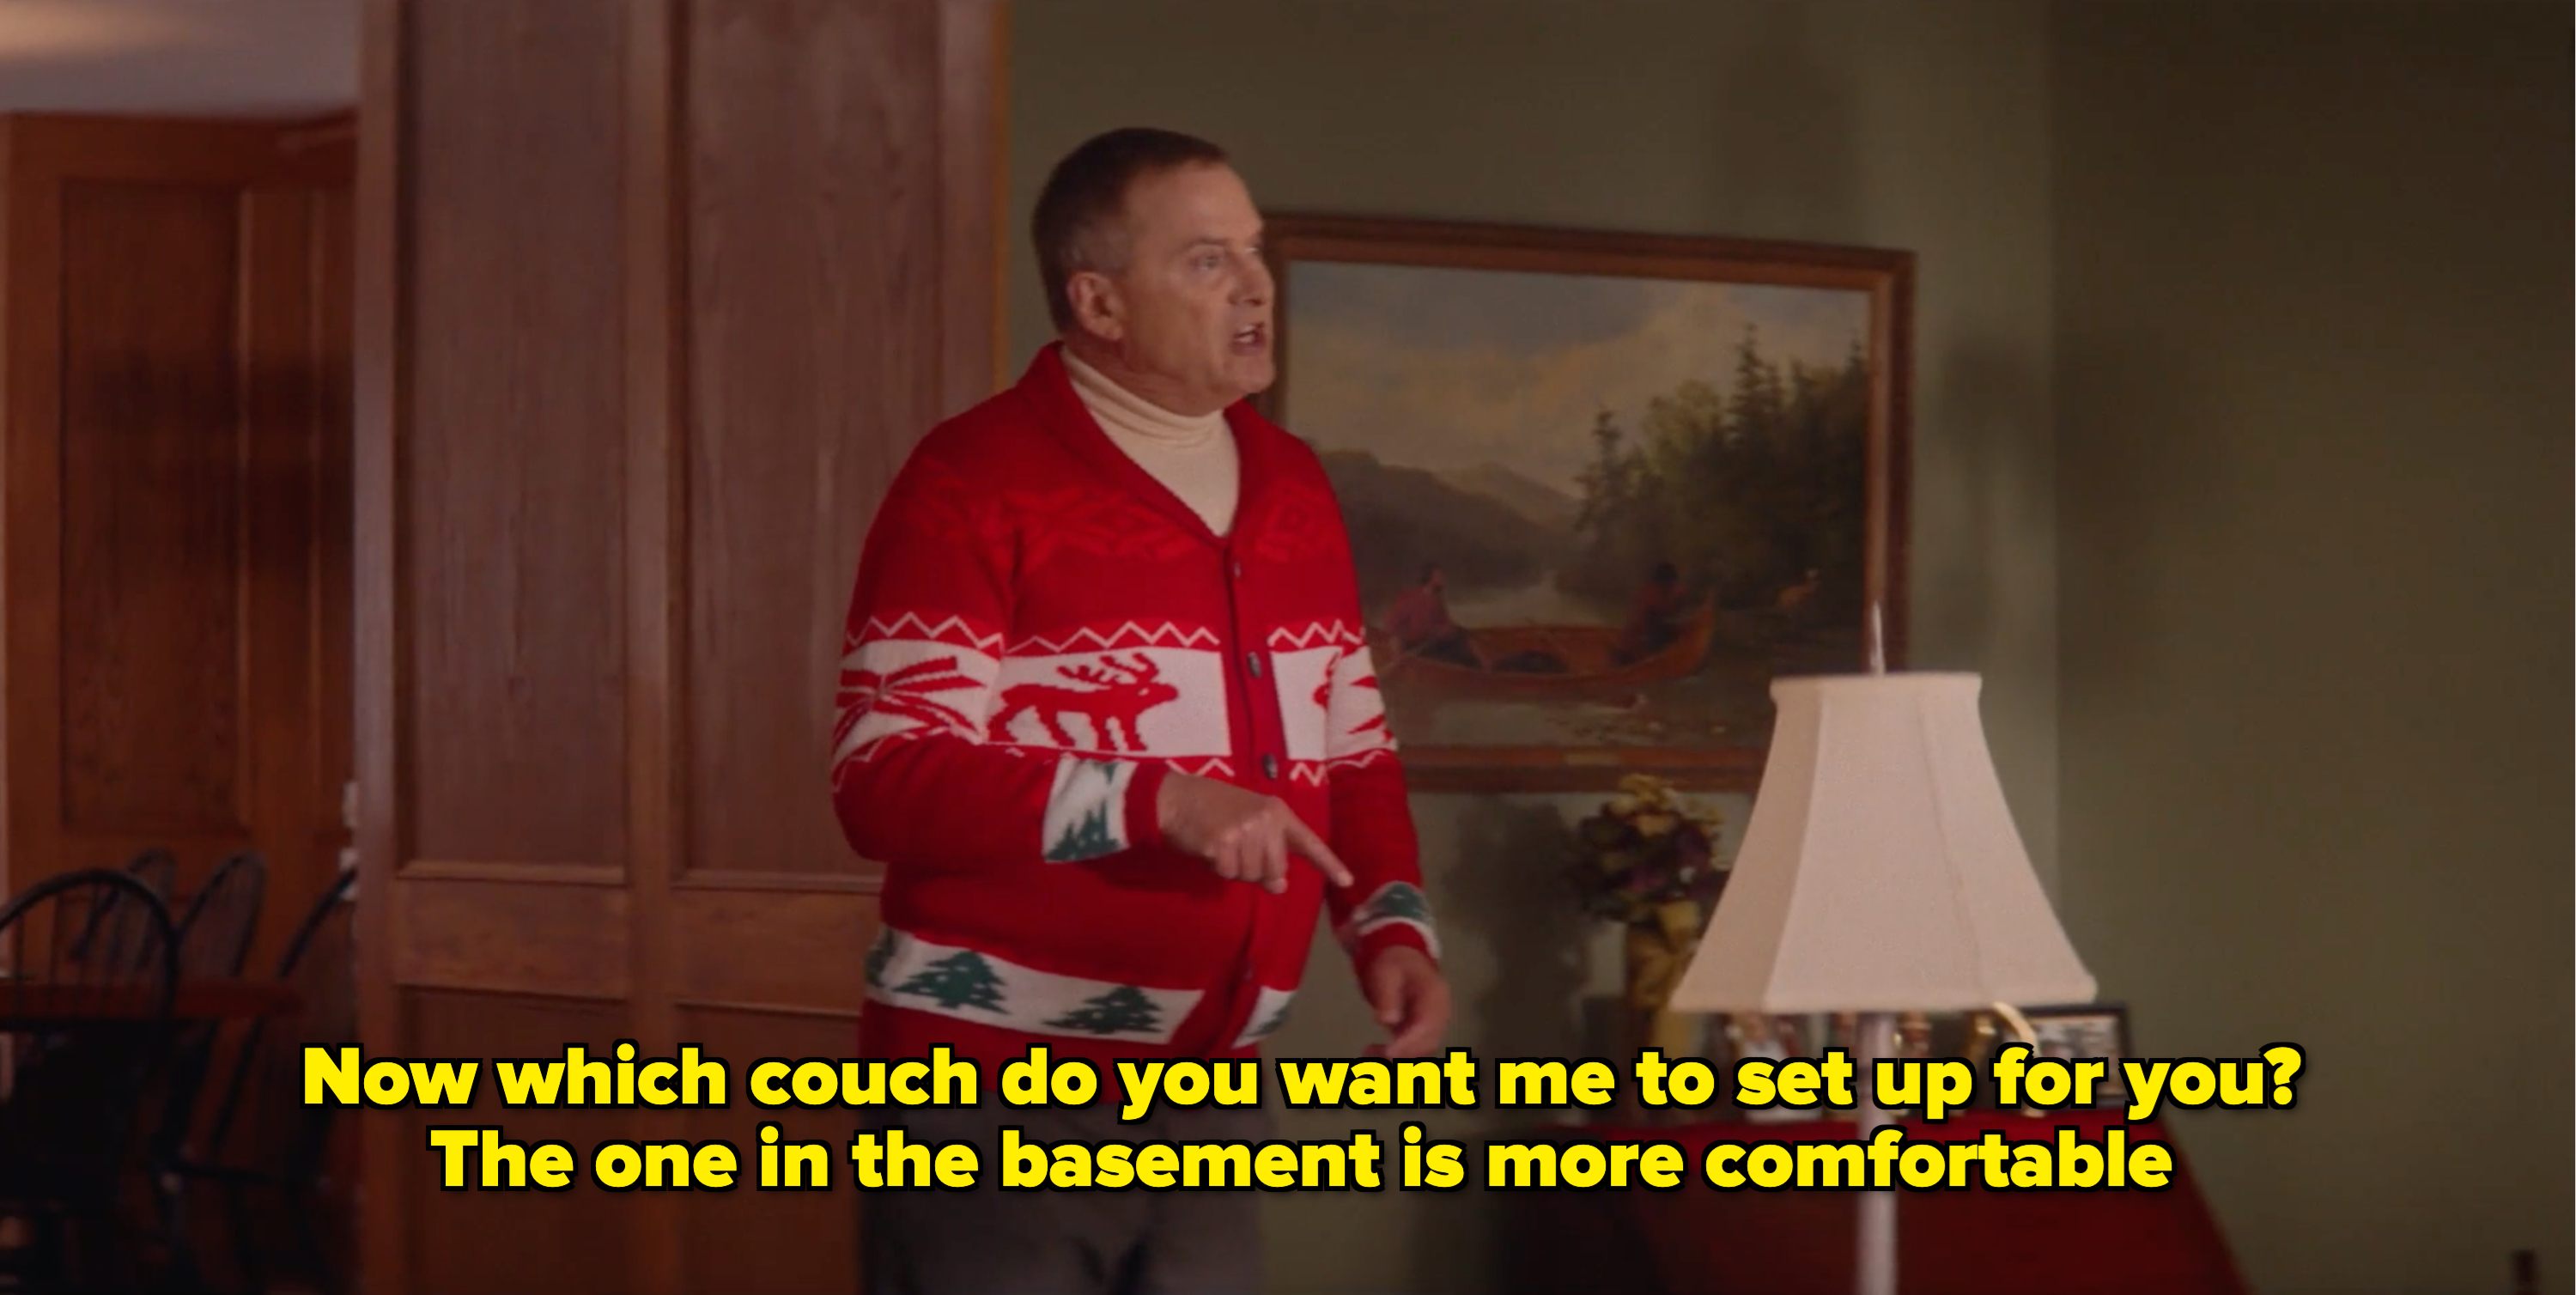 dad says: now which couch do you want me to set up for you? the one in the basement is more comfortable